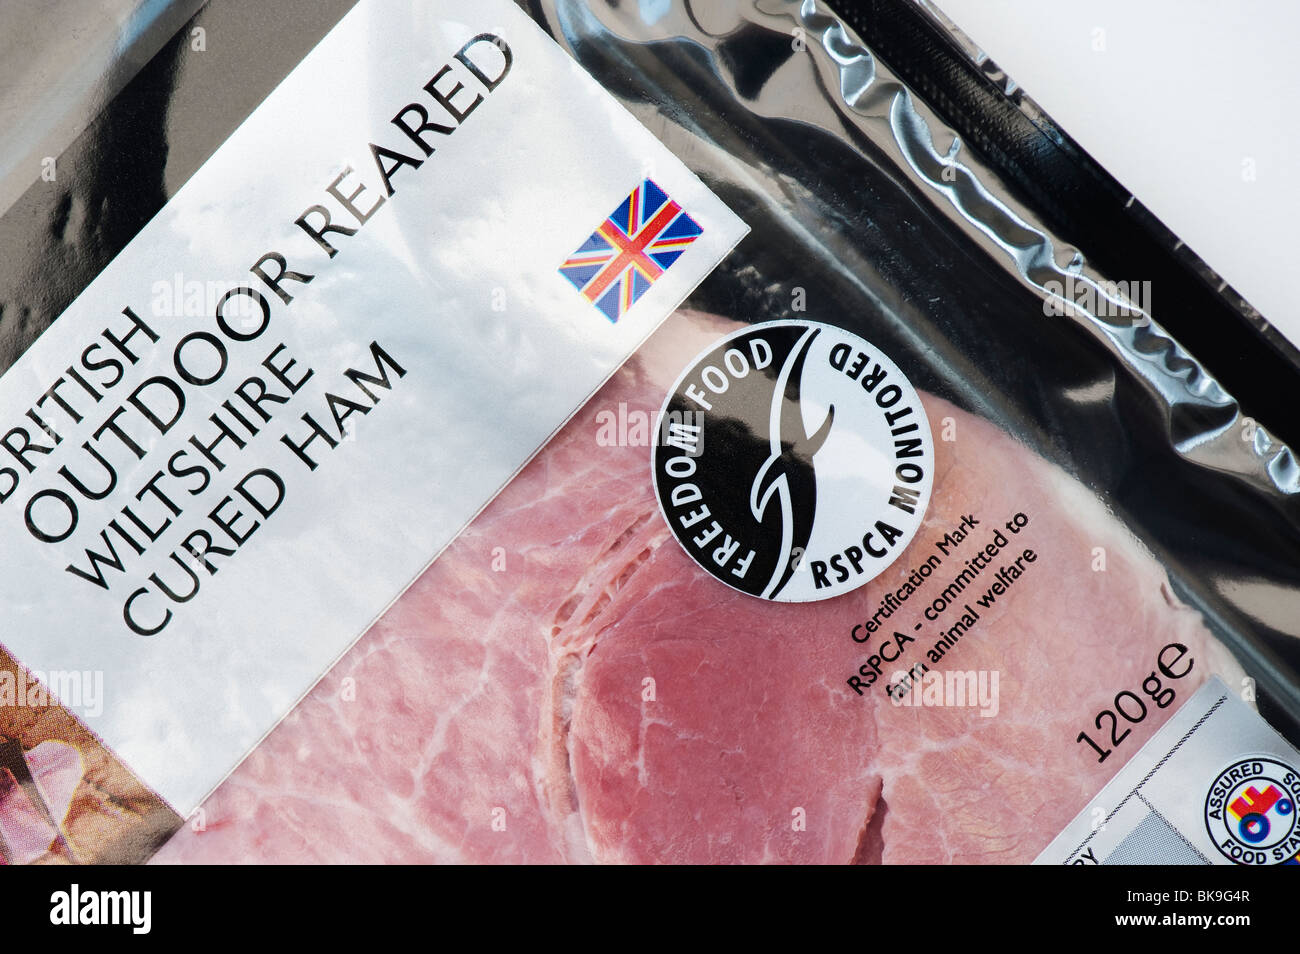 British meat packaging label. 'Freedom food' 'RSPCA monitored' Stock Photo